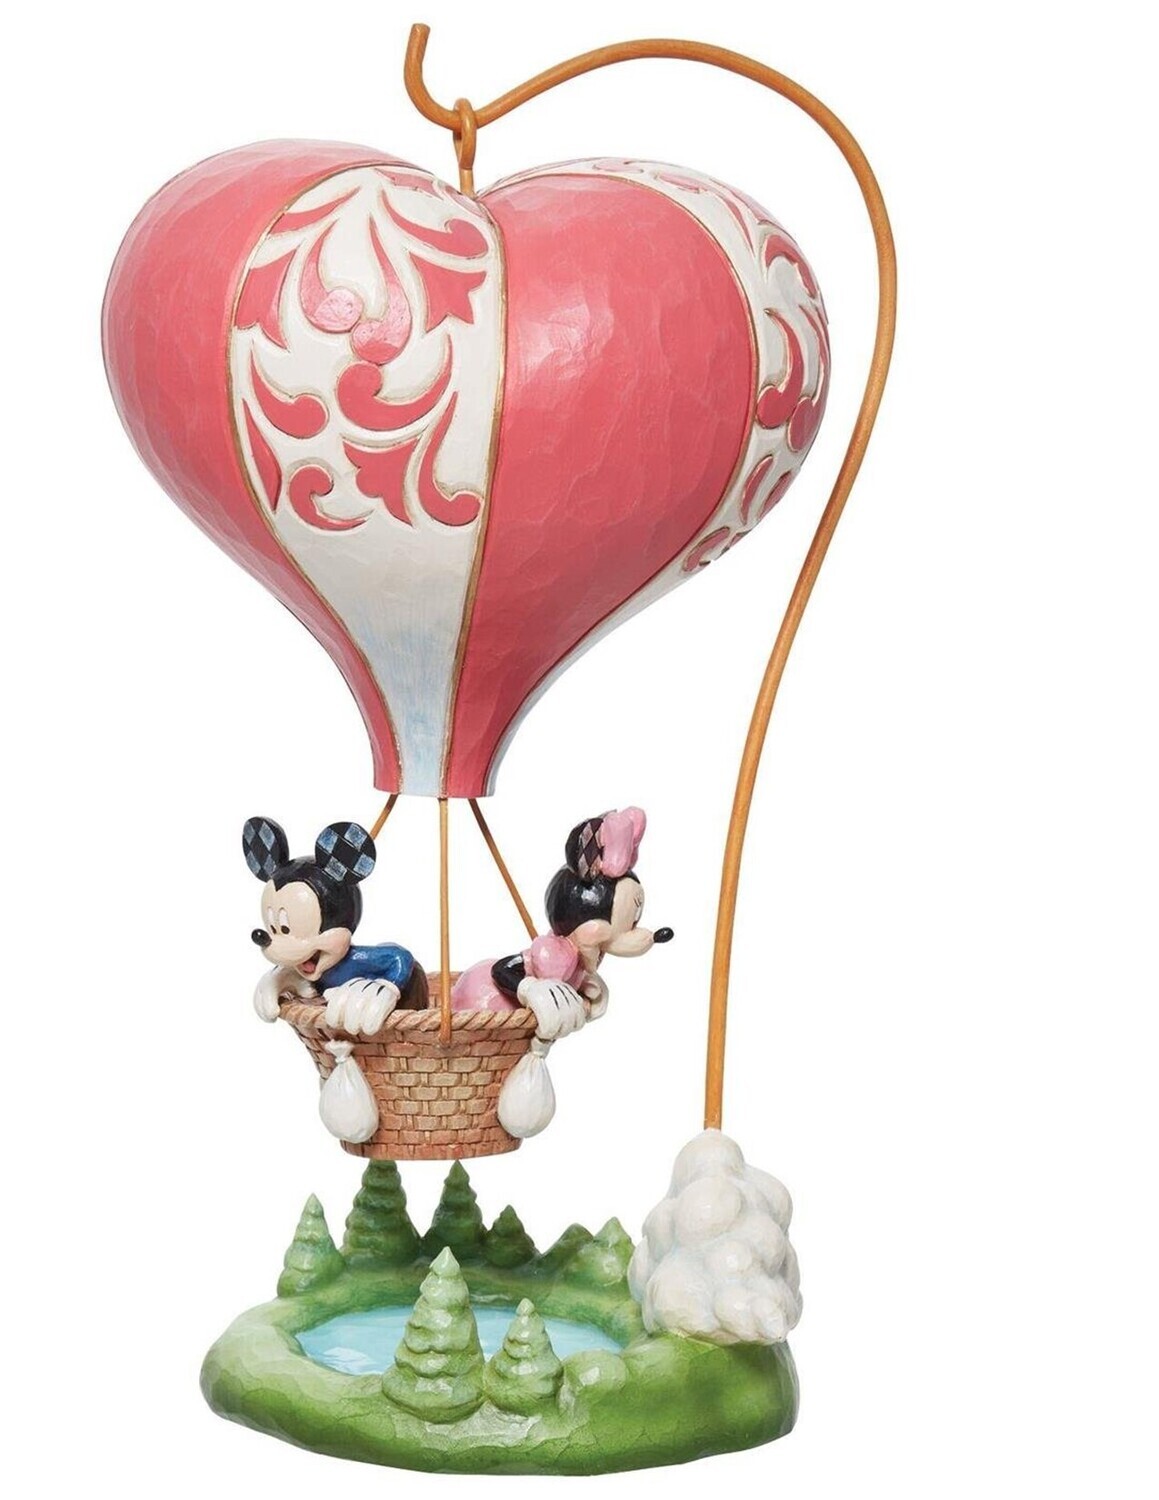 Minnie Mouse with Gifts figurine - Disney by Jim Shore